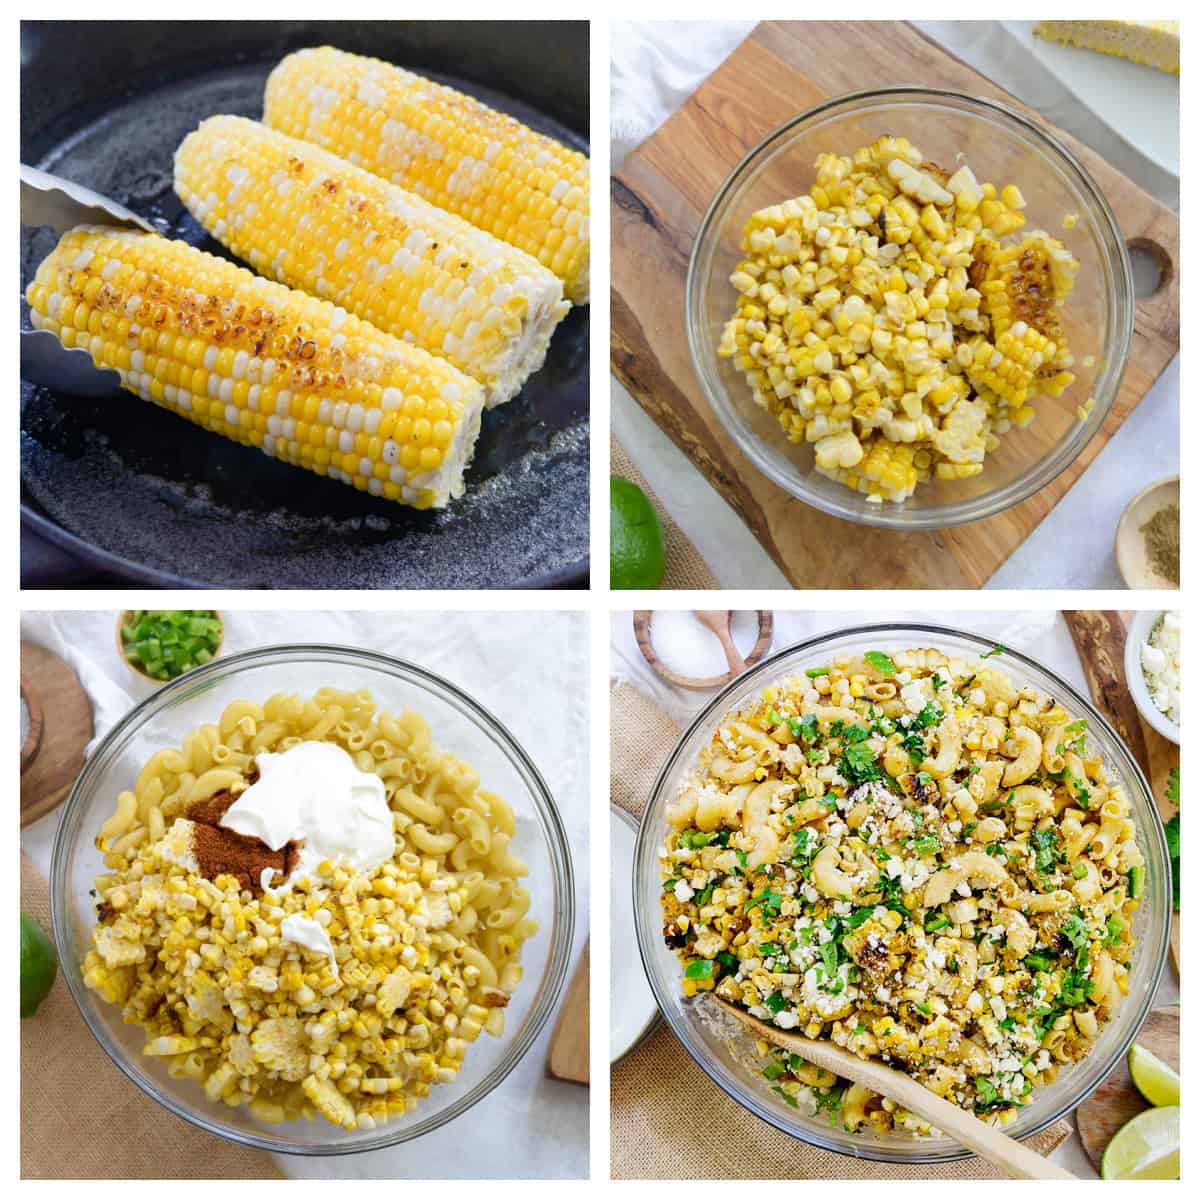 Collage showing how to make Mexican street corn salad.